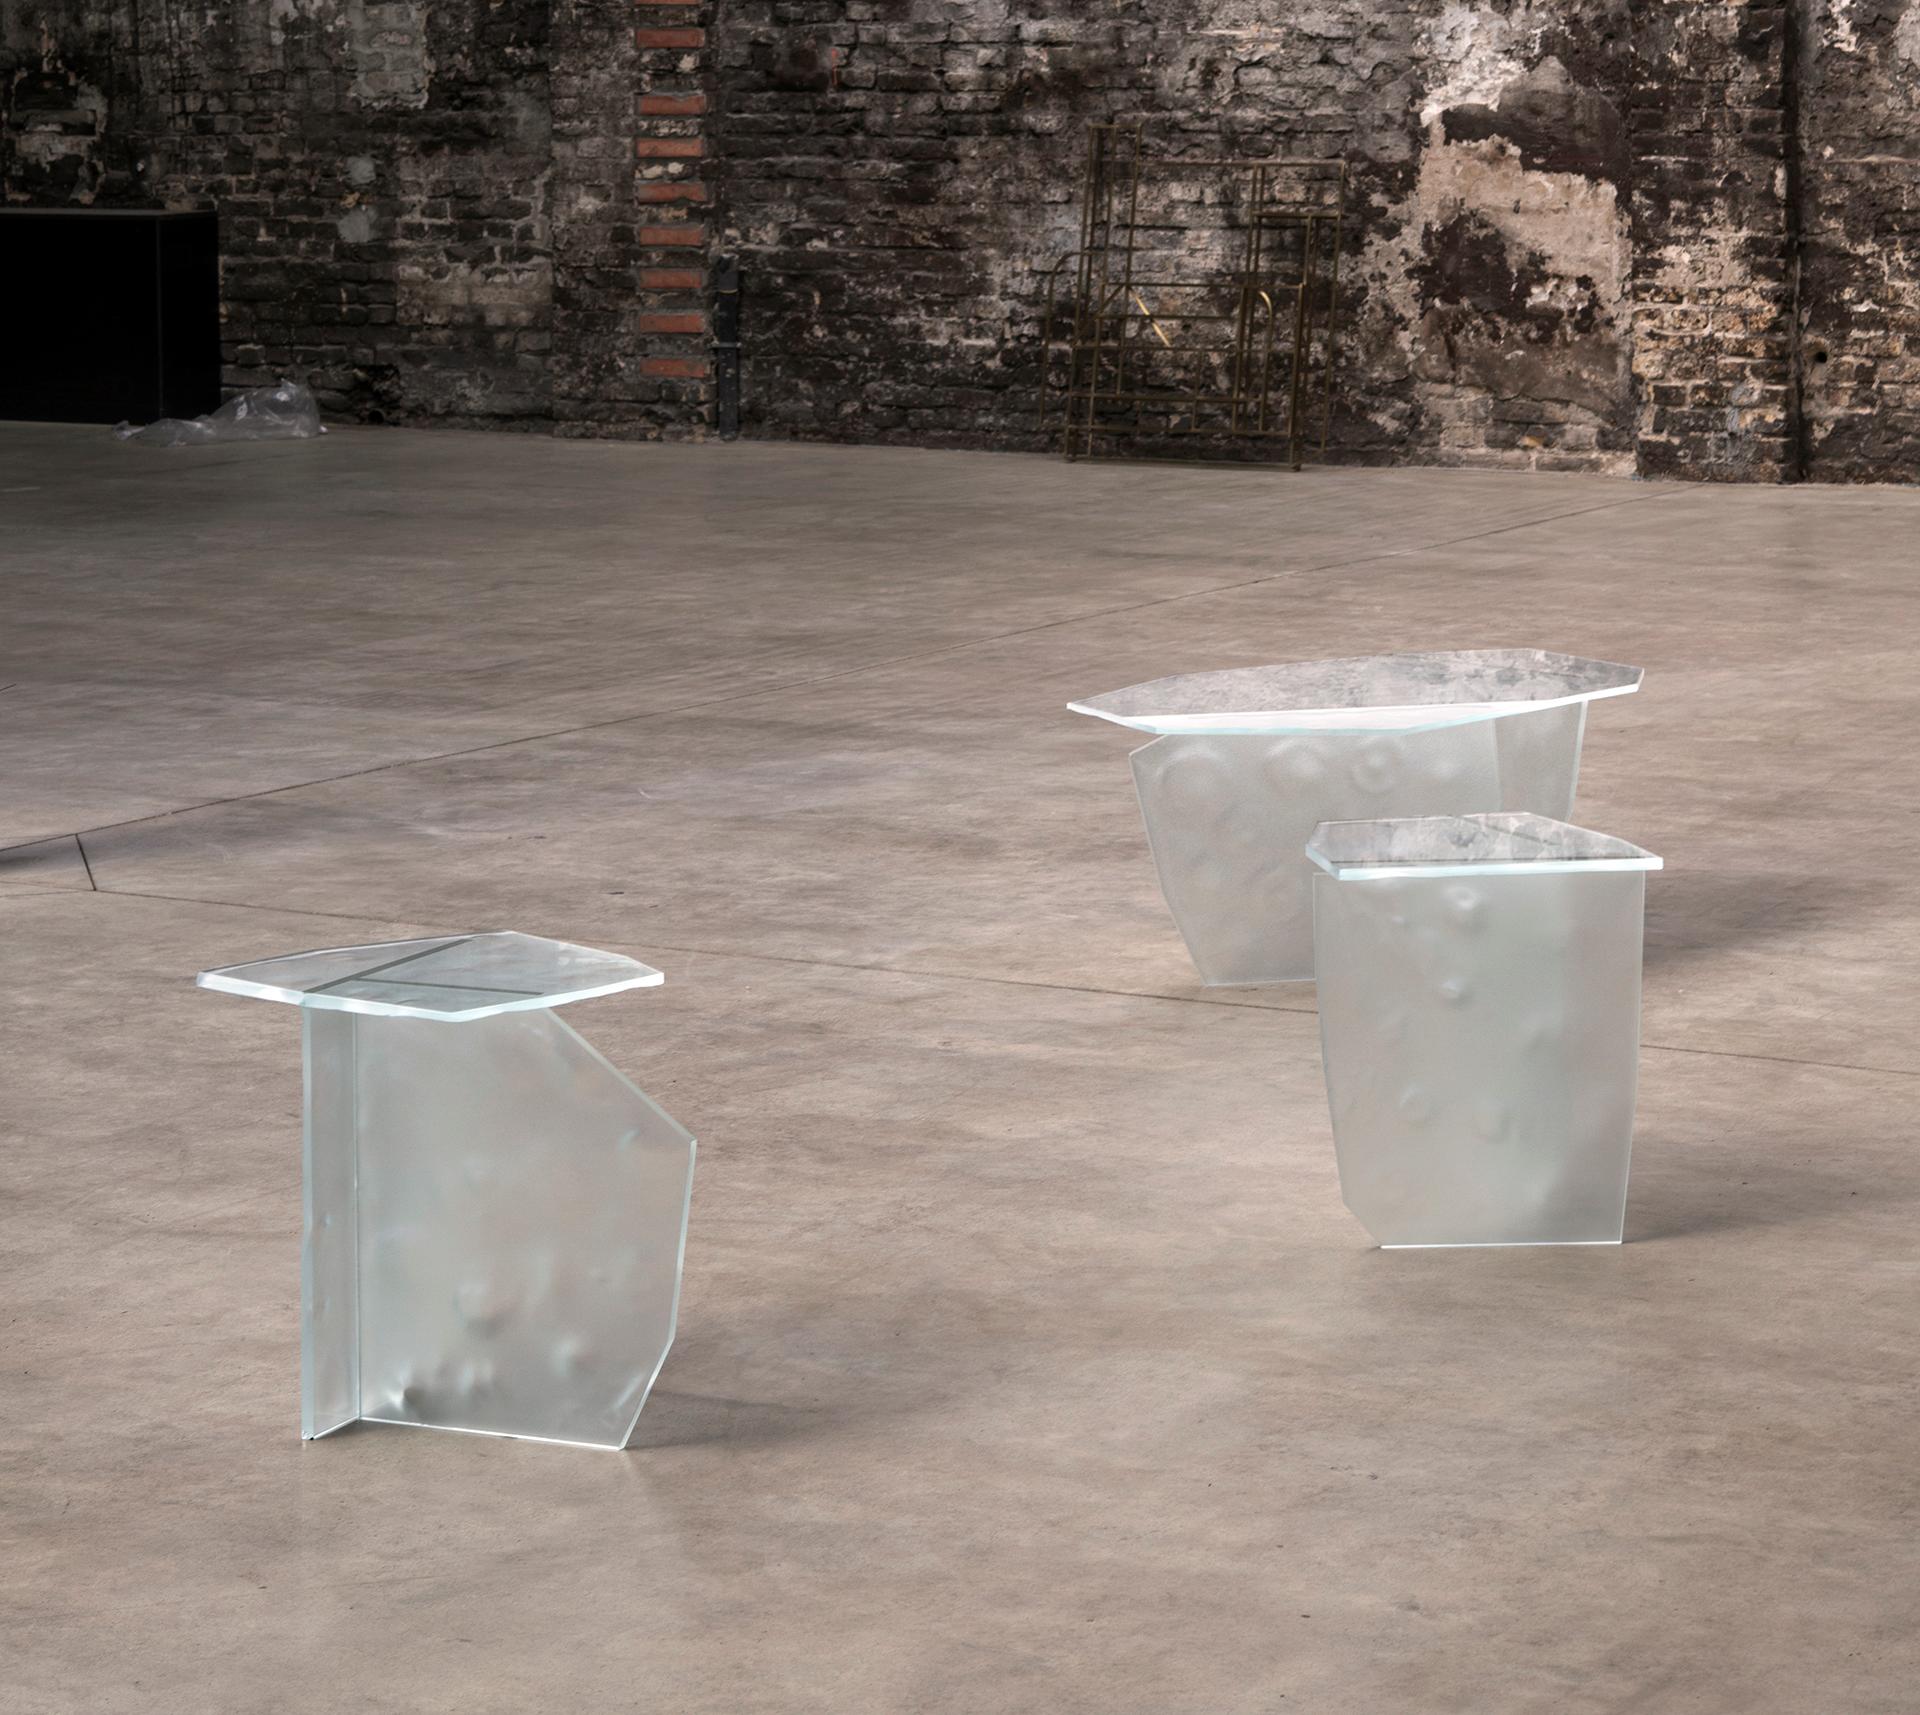 ICED glass tables are a sculptural expression for a moment of transition when water undulates between solid and liquid forms, floating on the surface of moving water.

The surfaces of the white optic glass panes are deep sandblasted by hand and